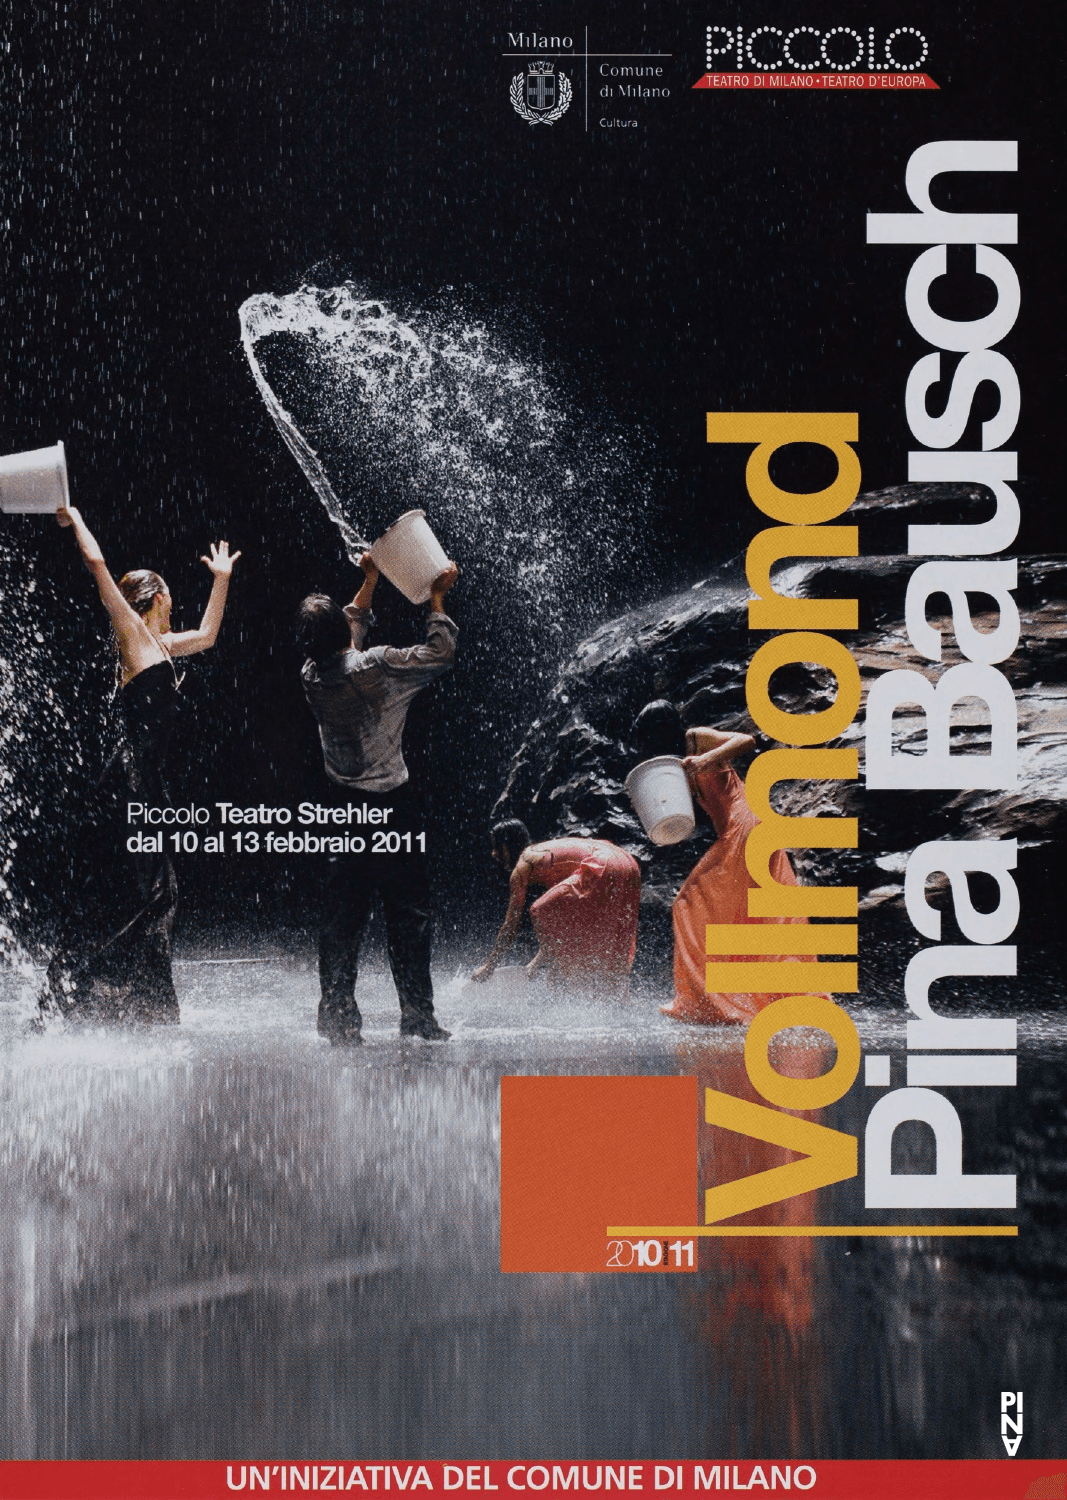 Booklet for “Vollmond (Full Moon)” by Pina Bausch with Tanztheater Wuppertal in in Milan, 02/10/2011 – 02/13/2011